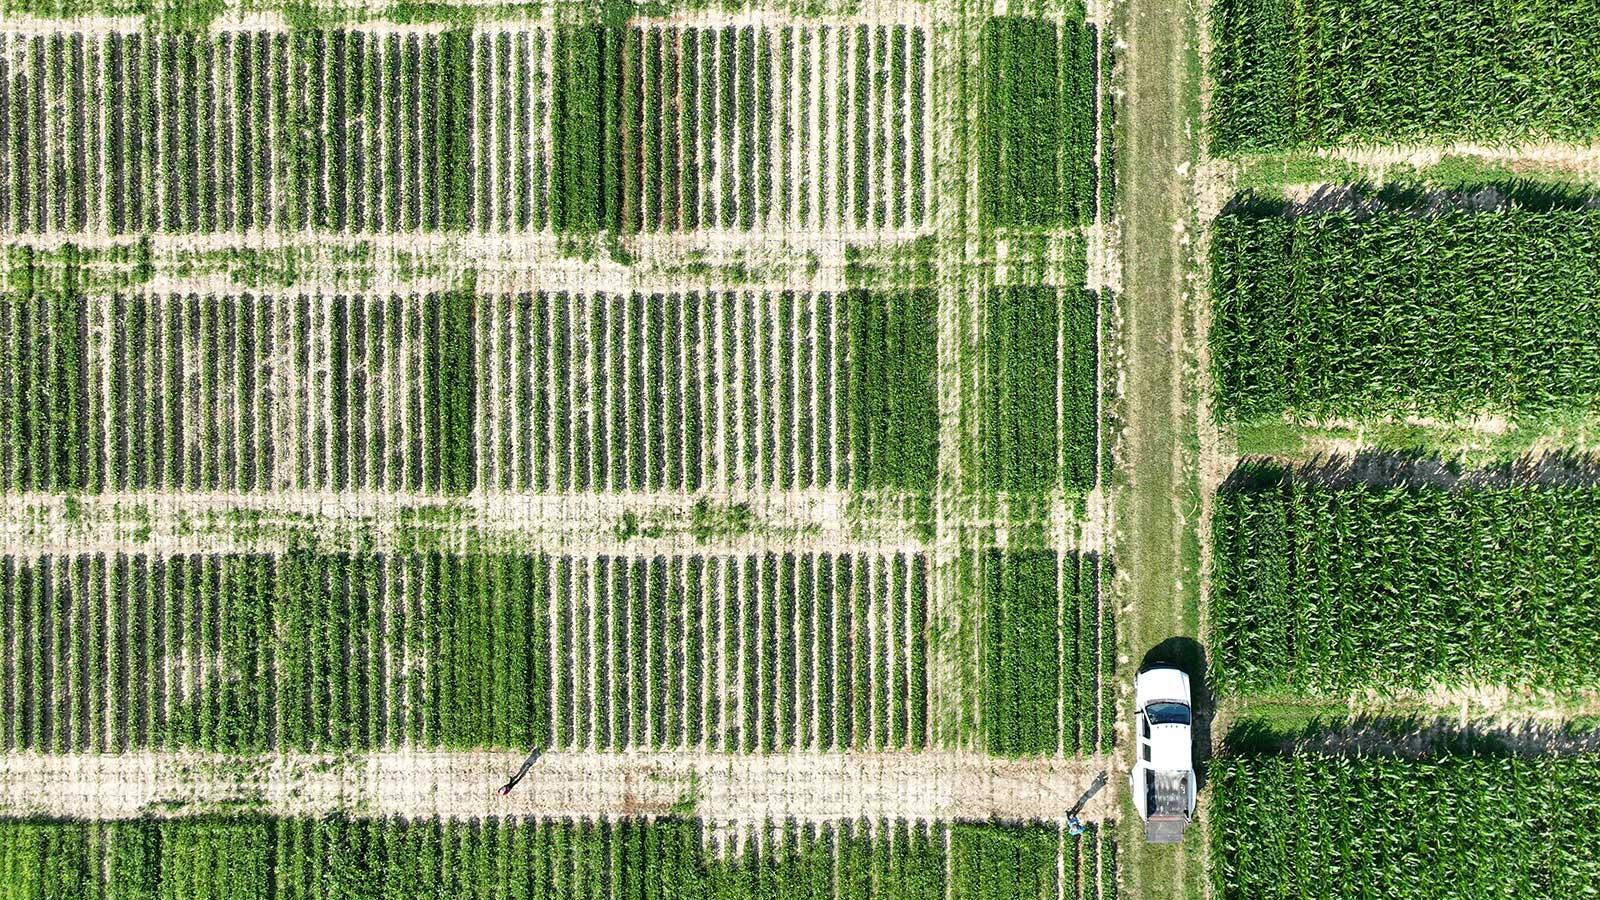 Weed management aerial view